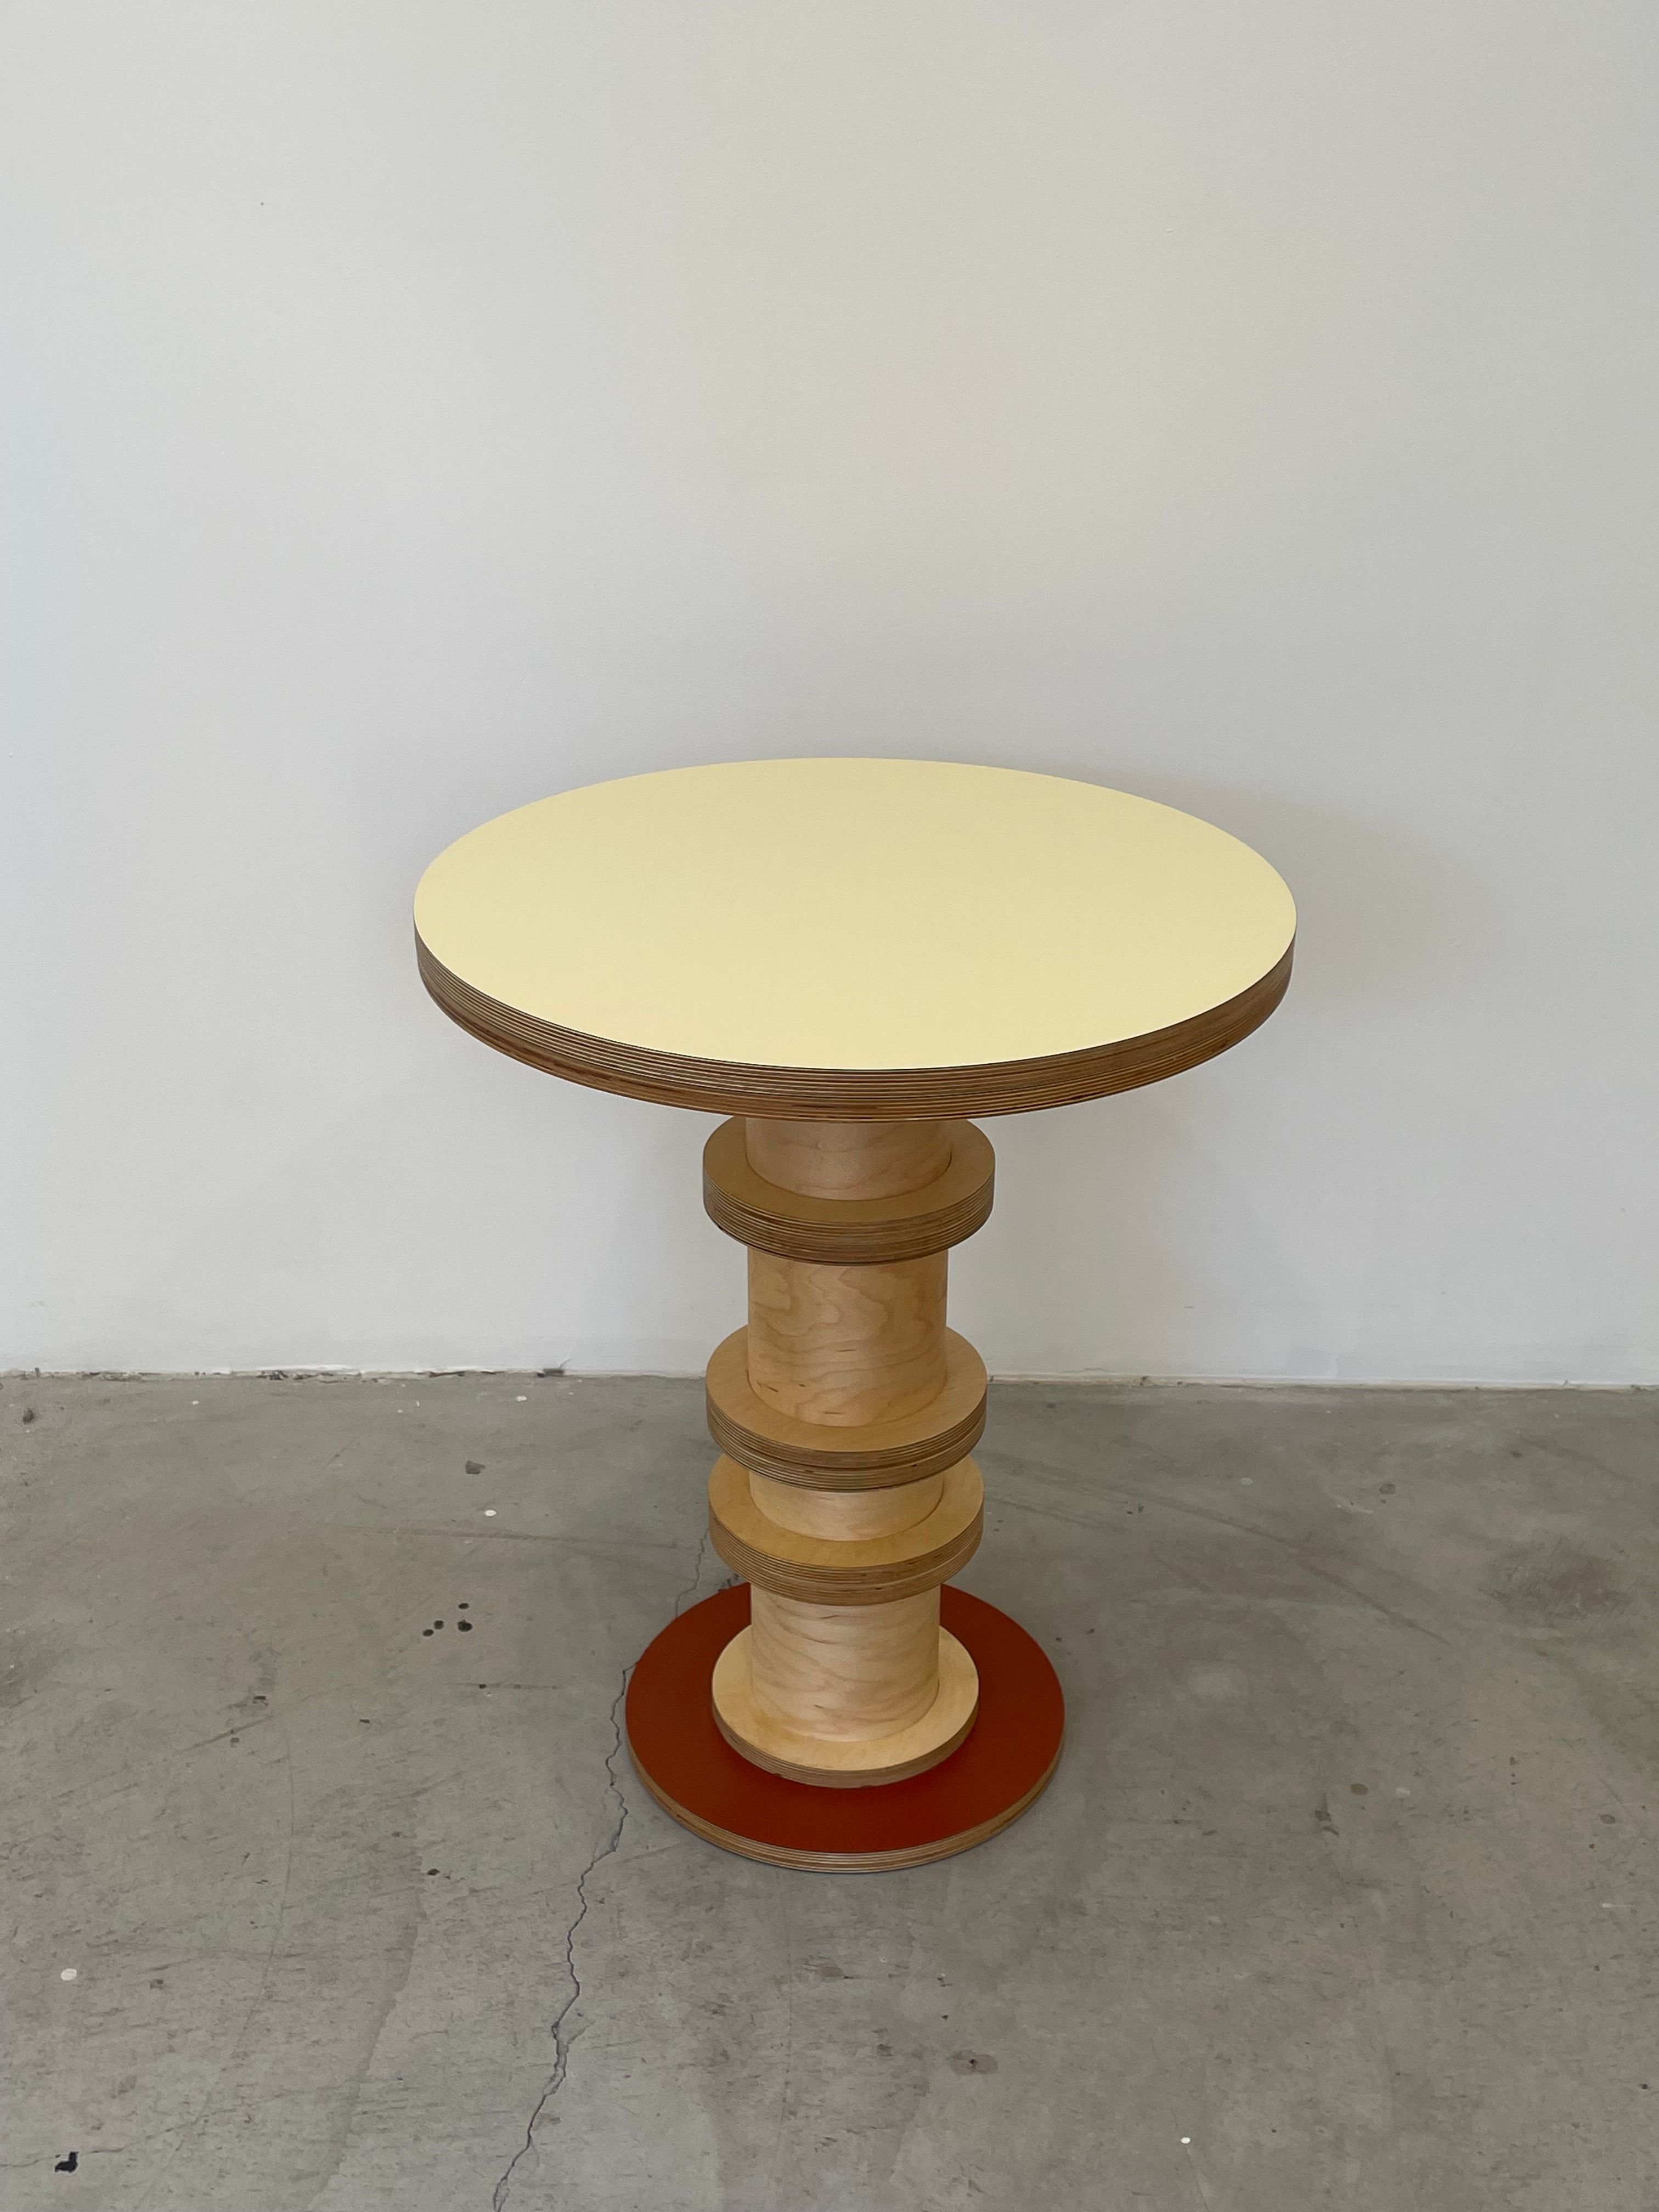  Round Column Table - Braindead Fabrications Gallery Show product image 2